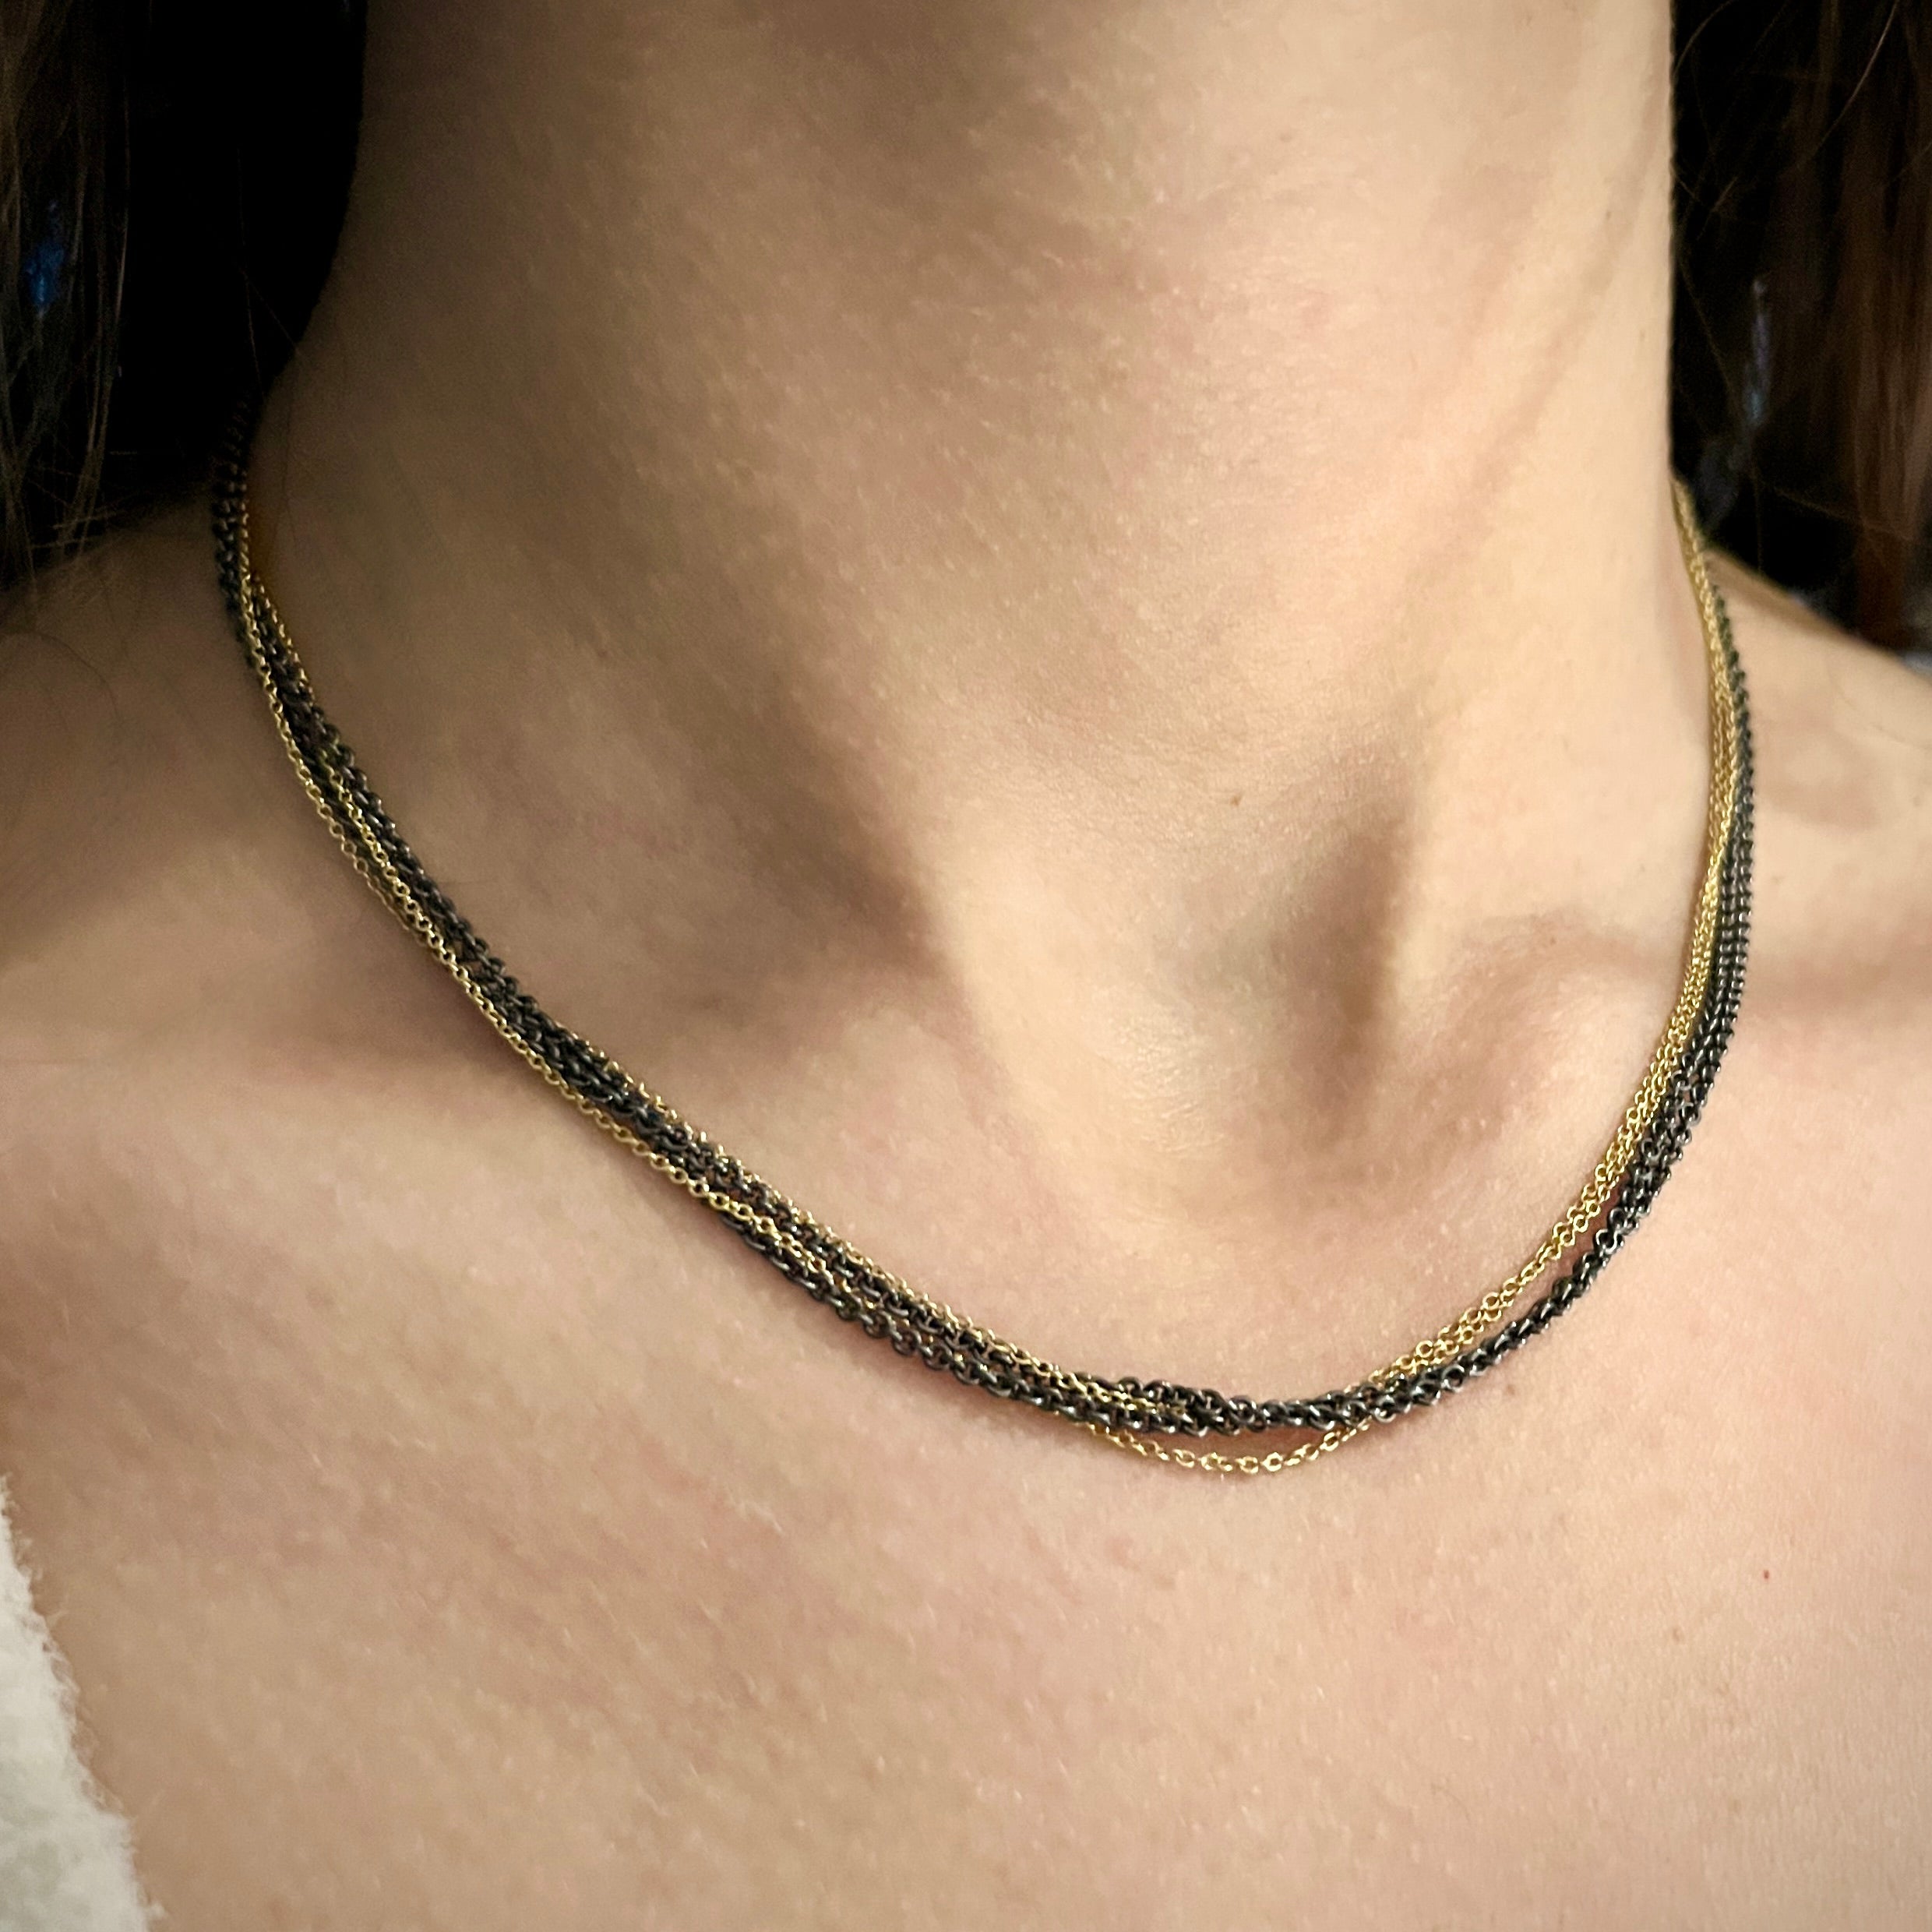 Silver Pyrite Drop Choker Necklace - Two Toned NecklaceDefault Title |  Delicate choker necklace, Choker necklace, Chokers